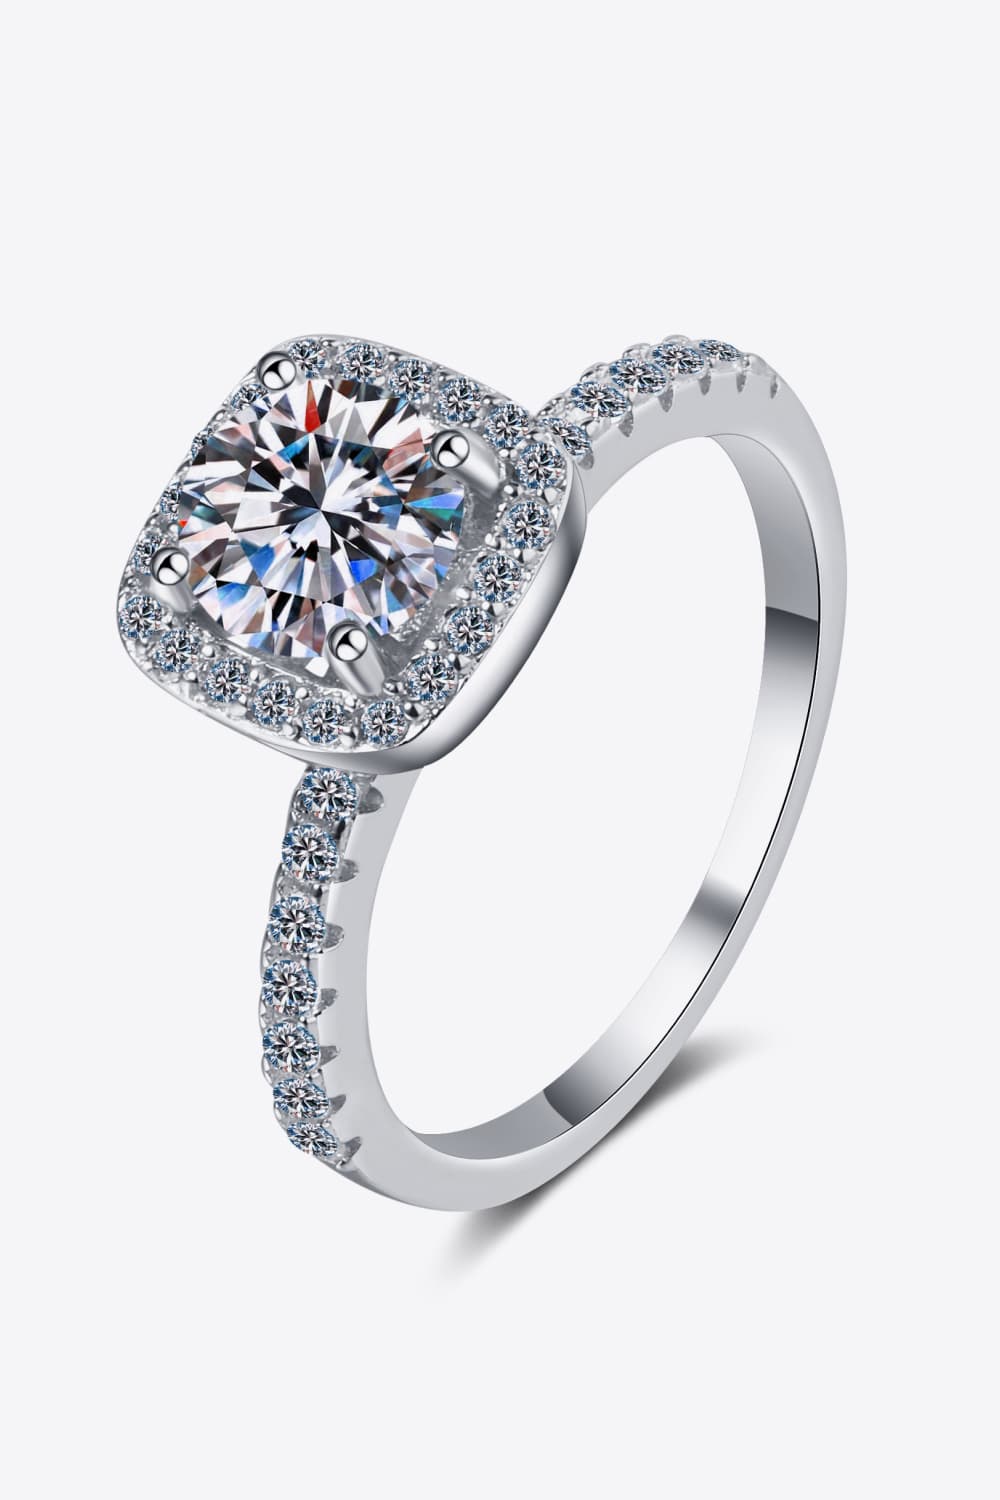 Enchanting Love - Mesmerizing 2 Carat Moissanite Square Halo Ring - Let Your Everlasting Love Shine with Unparalleled Radiance - Guy Christopher